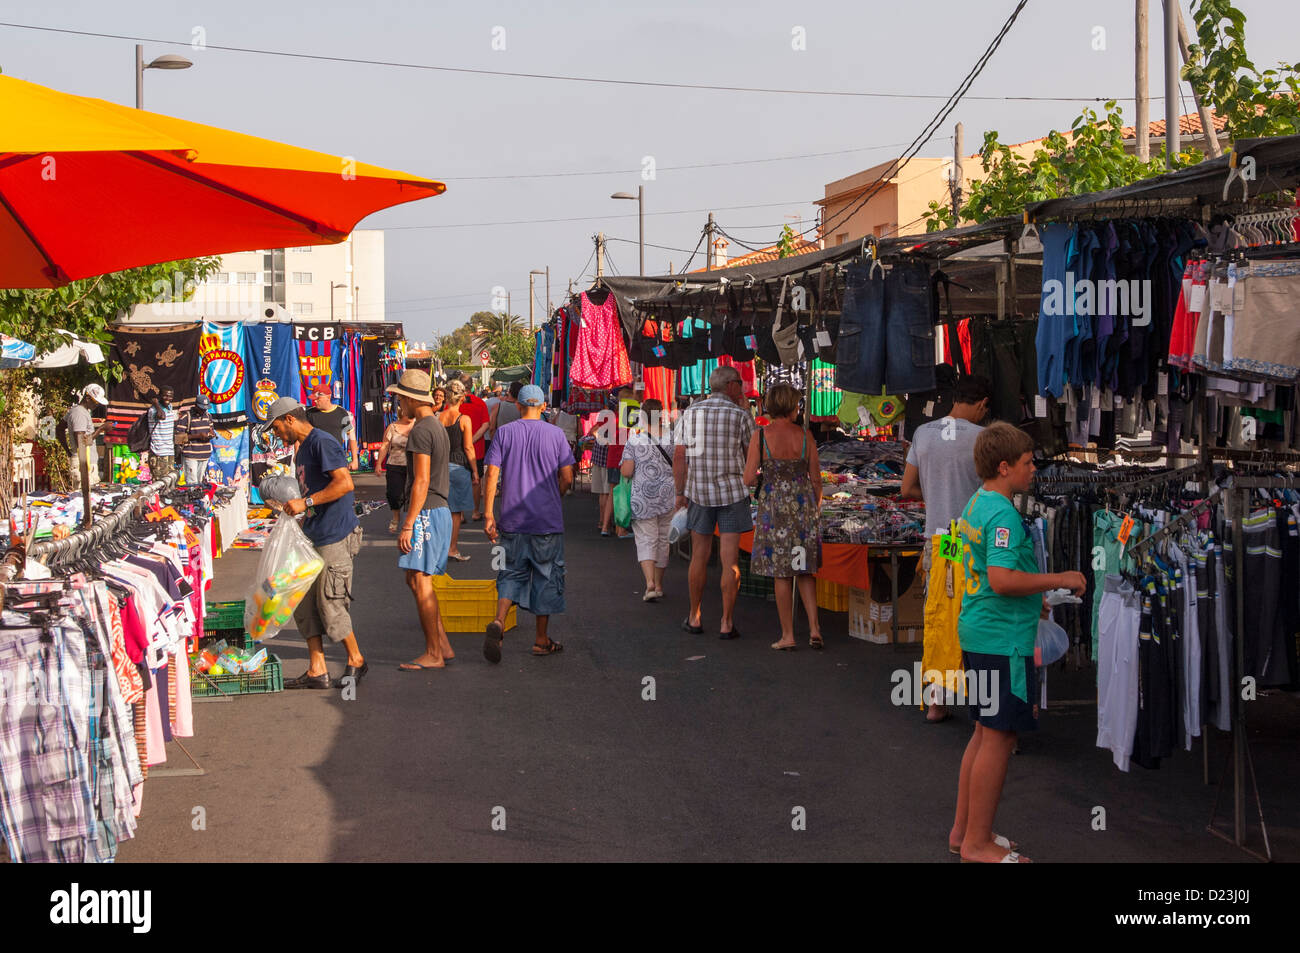 People shopping in a street market in Spain Stock Photo